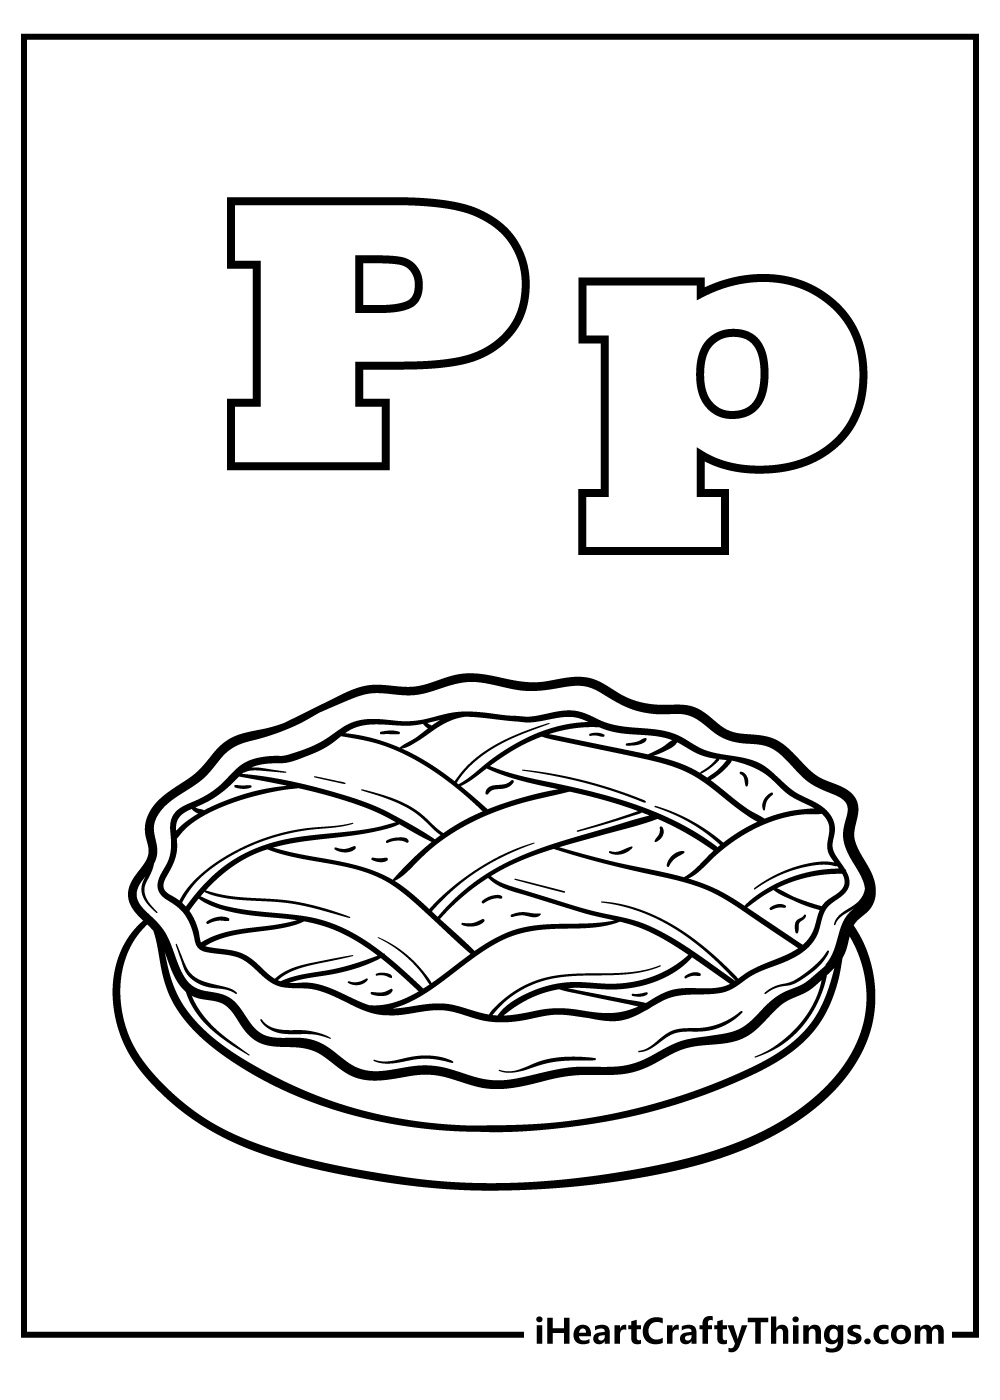 Letter P Coloring Pages for preschoolers free printable